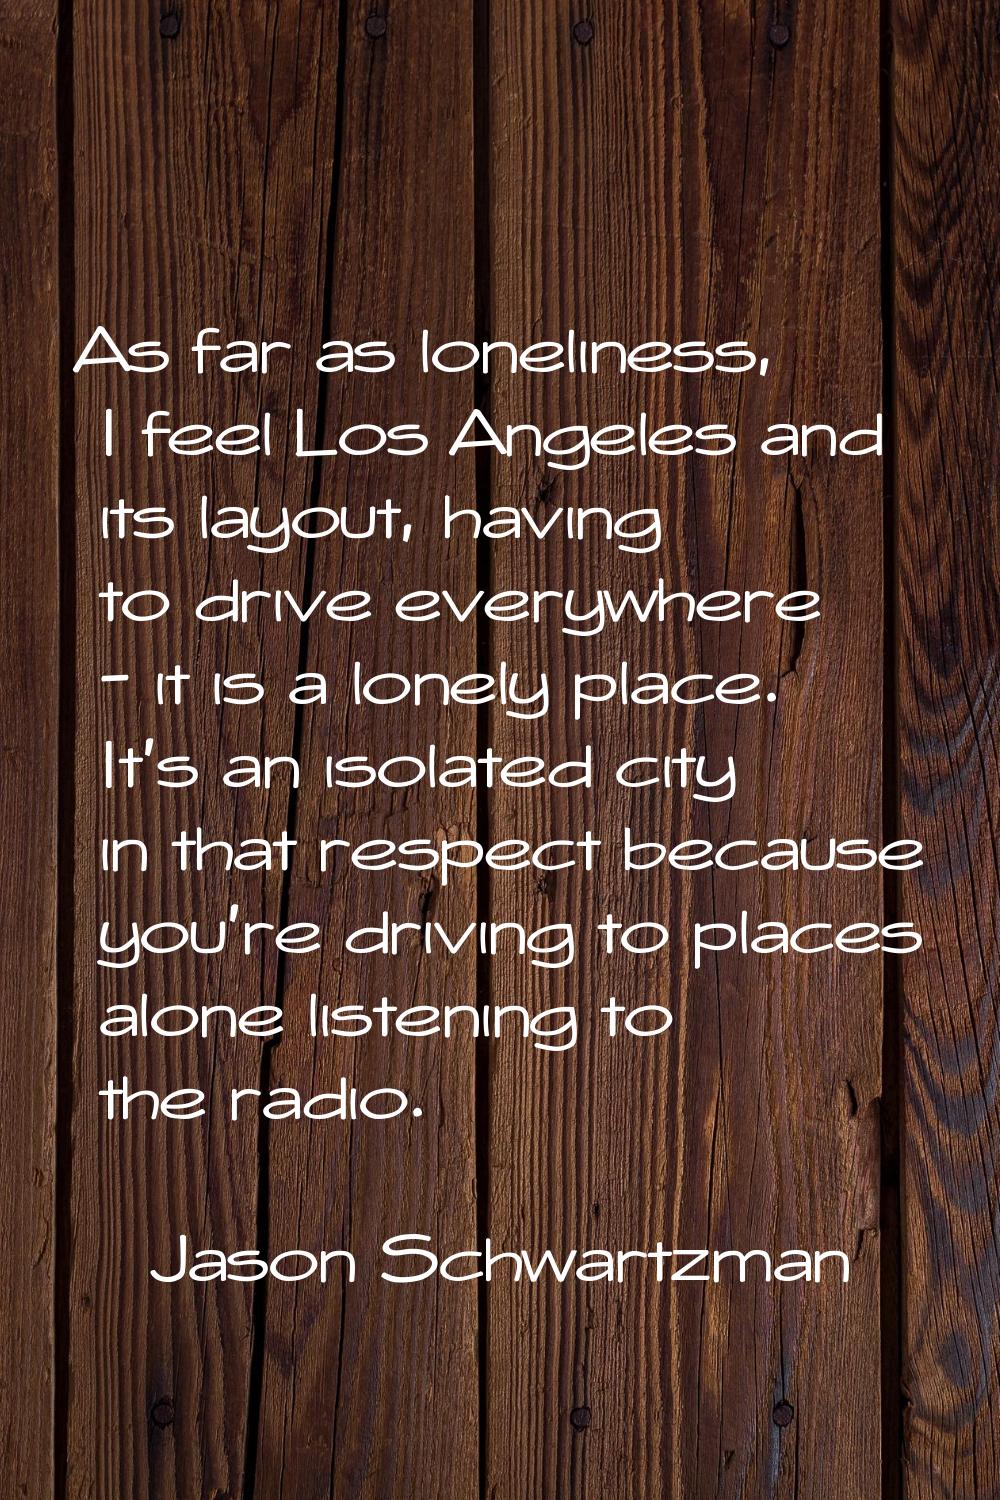 As far as loneliness, I feel Los Angeles and its layout, having to drive everywhere - it is a lonel